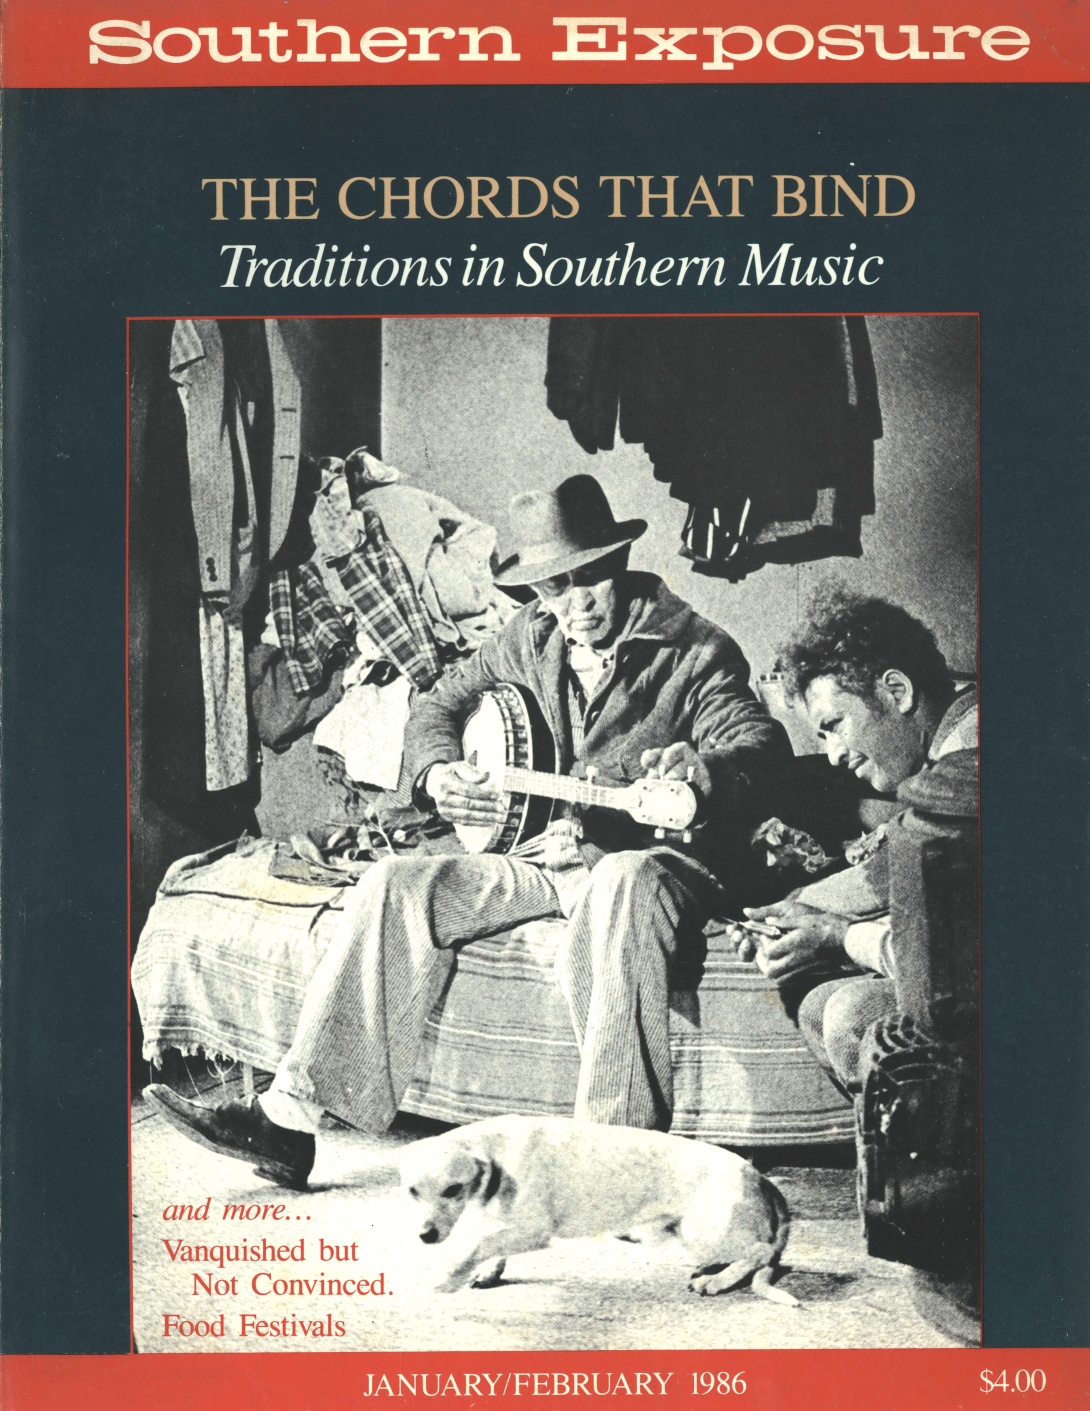 Magazine cover with photo of two men playing string instruments and dog 